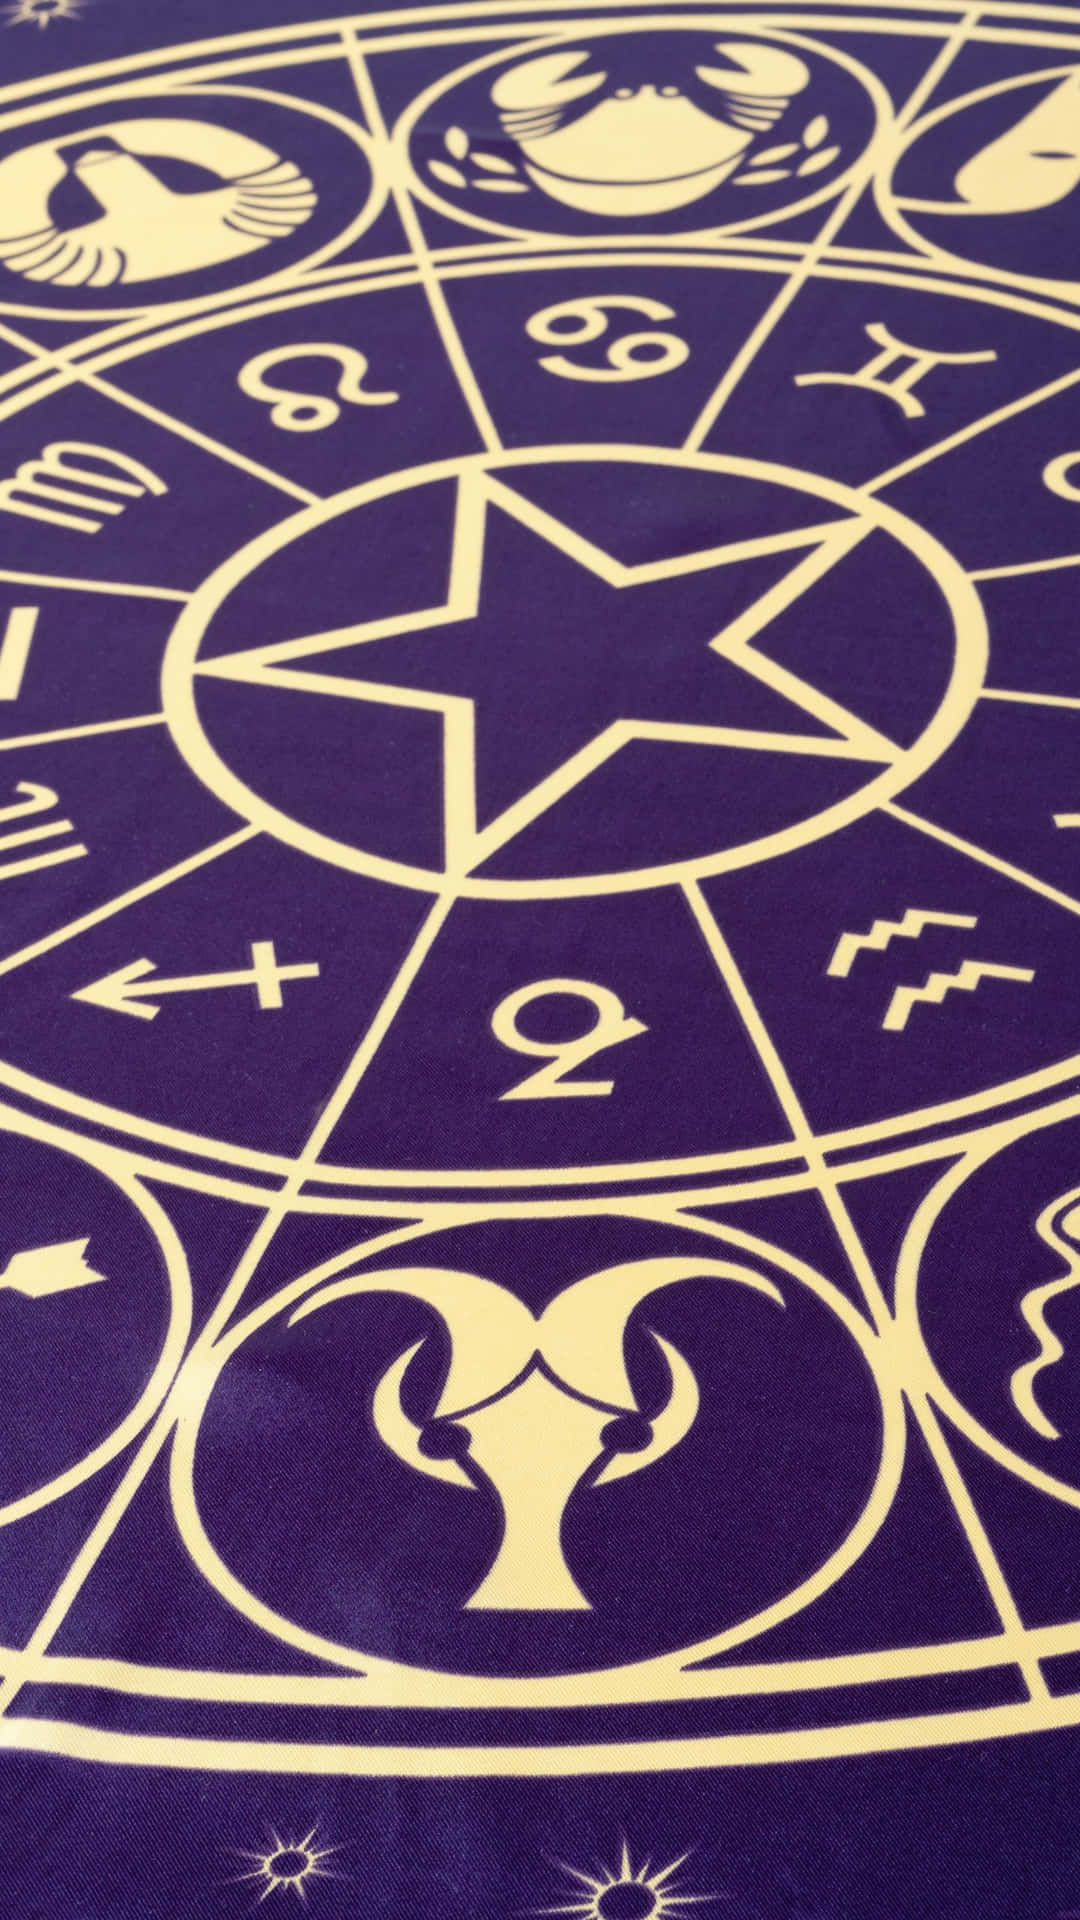 A Purple Rug With Astrological Symbols On It Wallpaper